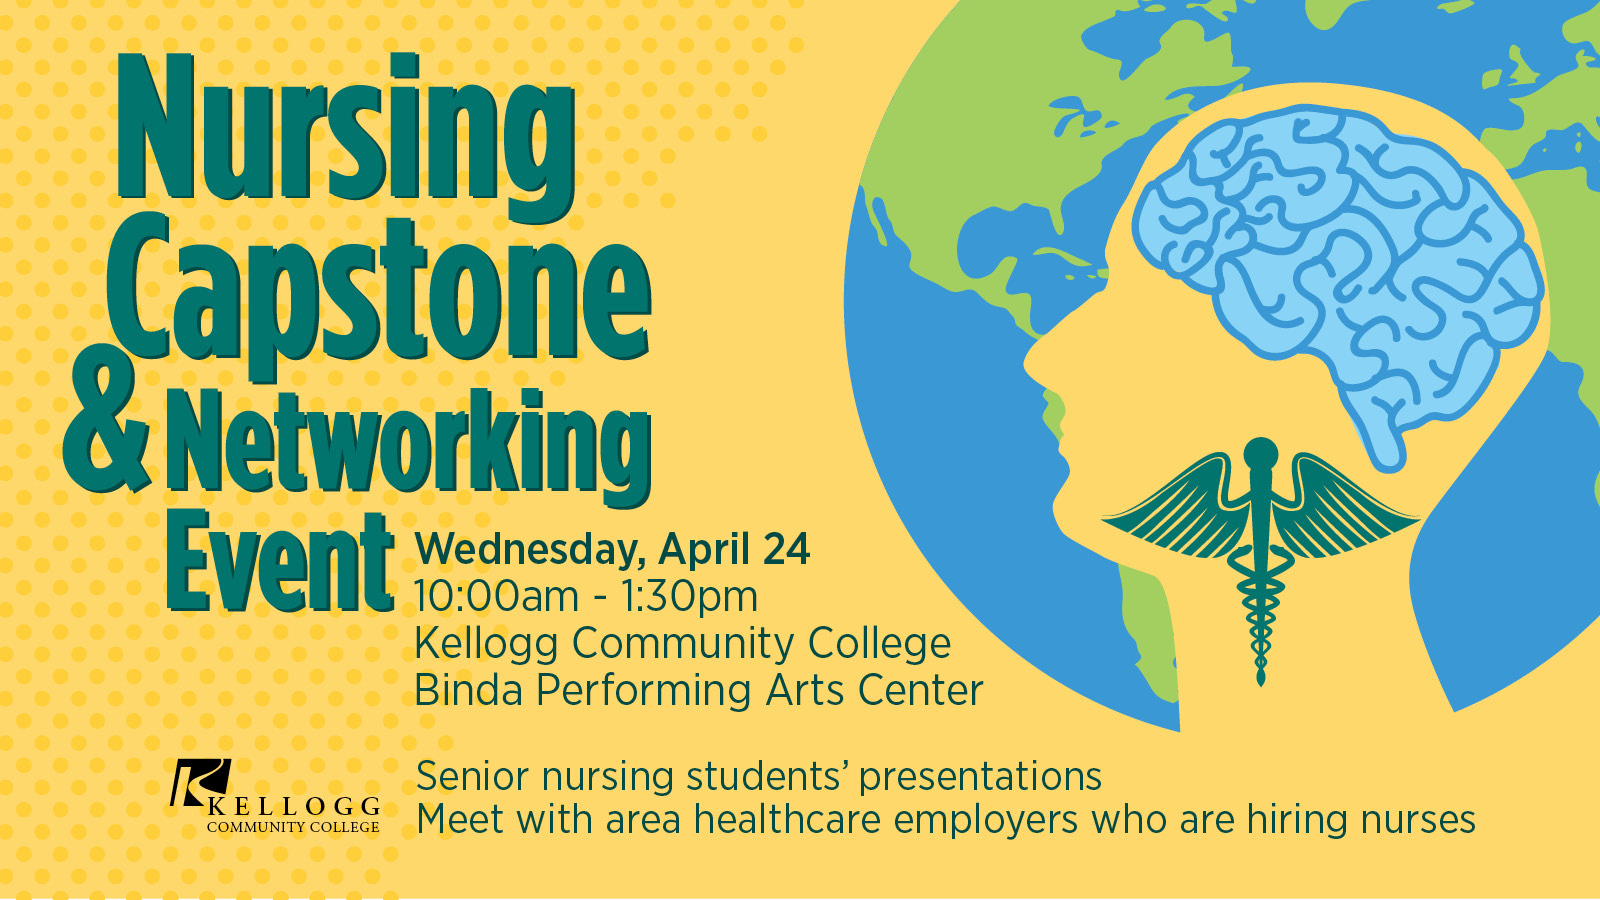 A text slide promoting KCC's 2019 Nursing Capstone & Networking event, featuring the illustration of a human head and brain and nursing symbol.